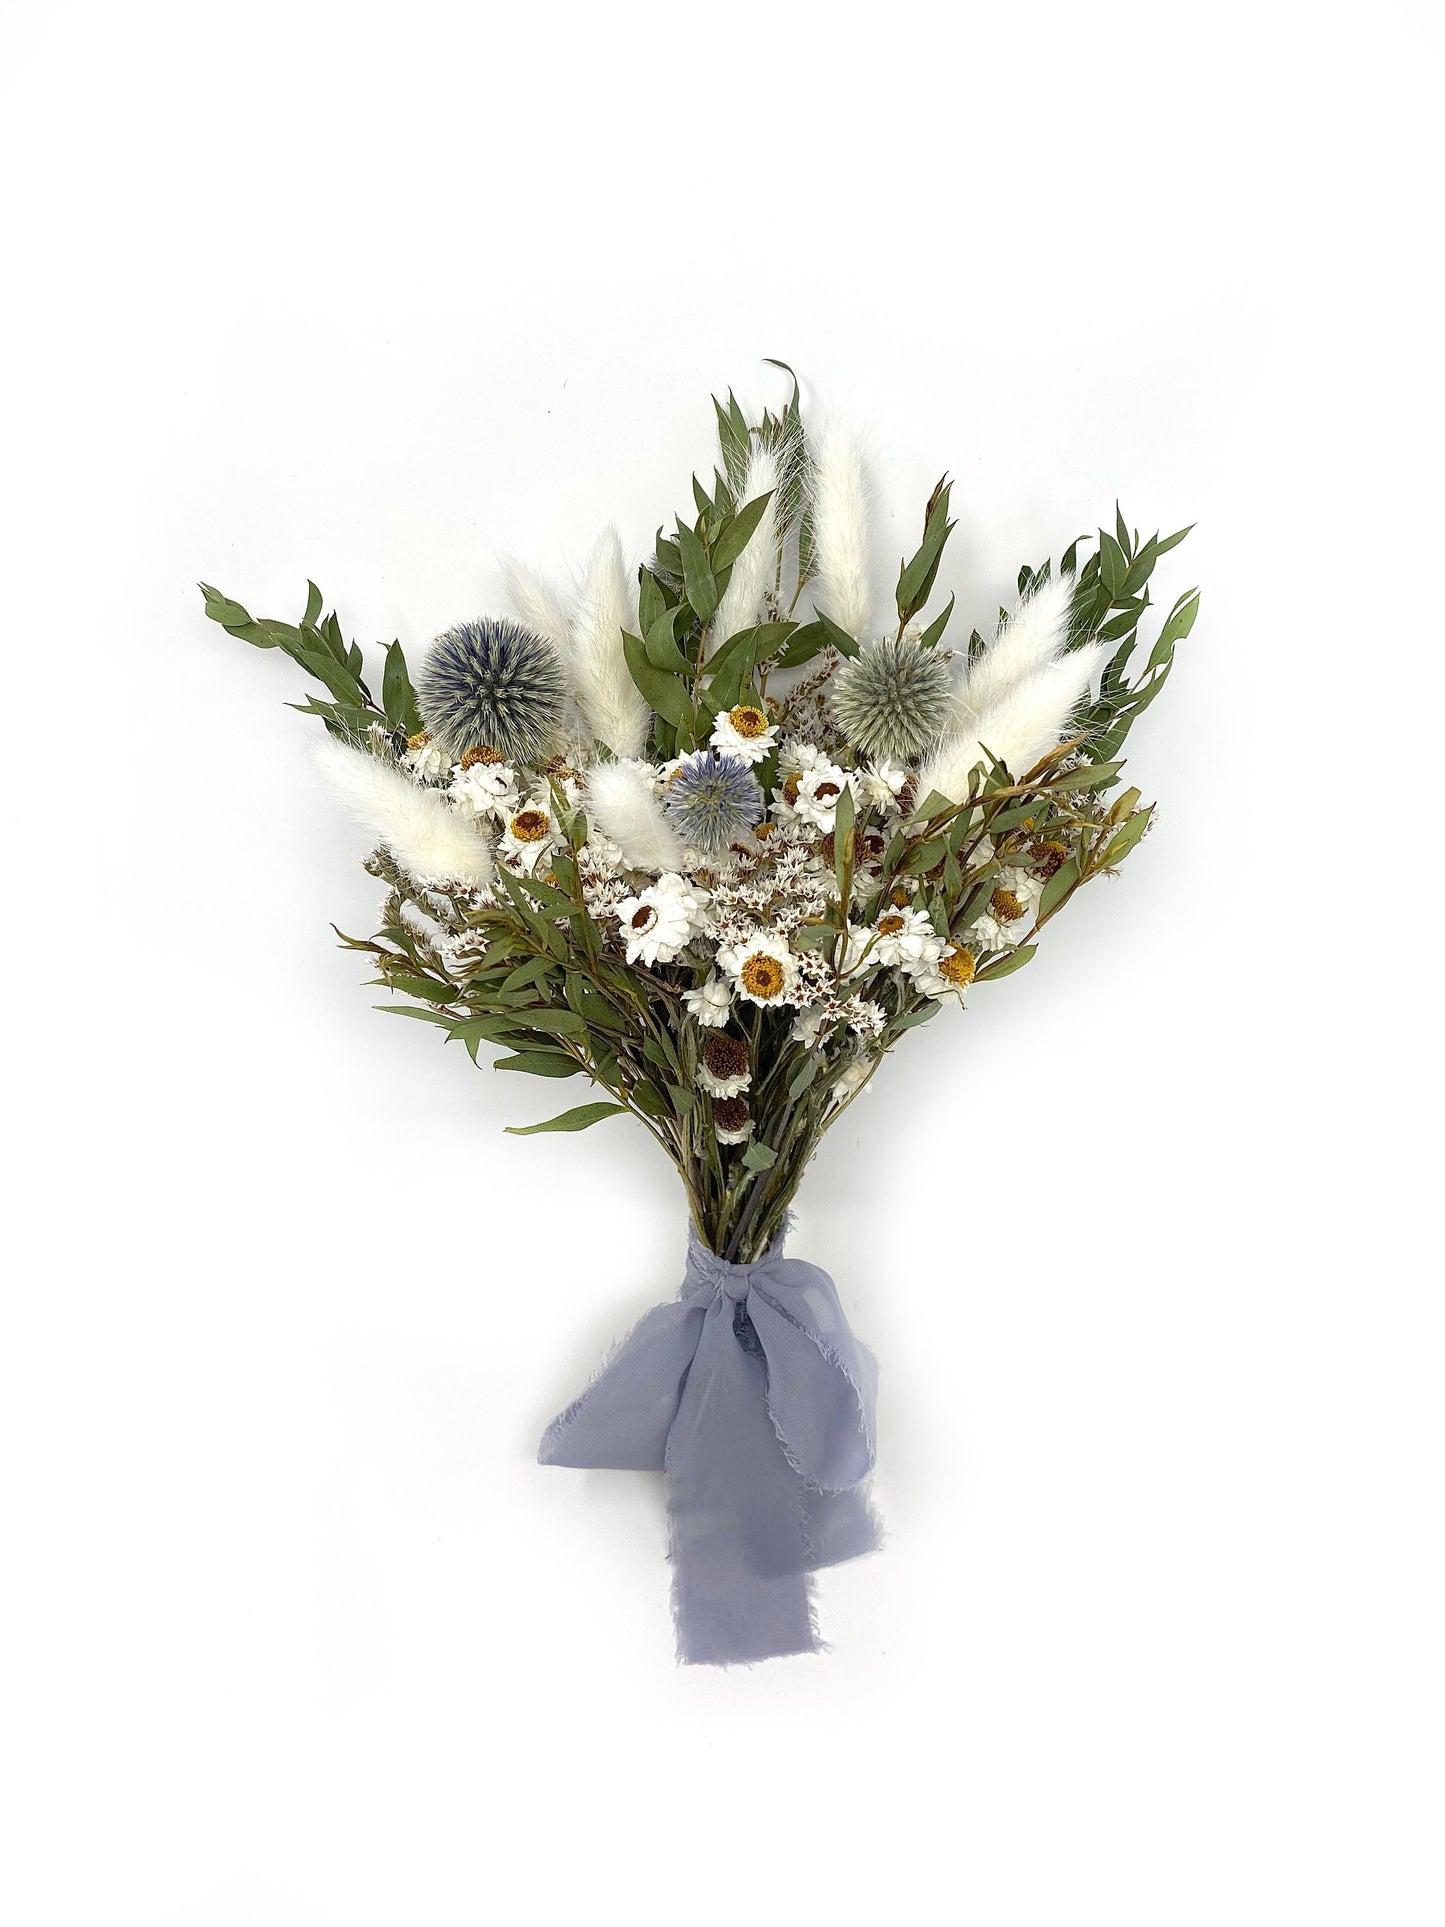 Wedding Bouquet, Dried Flowers, Preserved Floral, Rustic, Ammobium, bunny tails, Bridal, Winter, Throw Bouquet, Spring, Blue and White